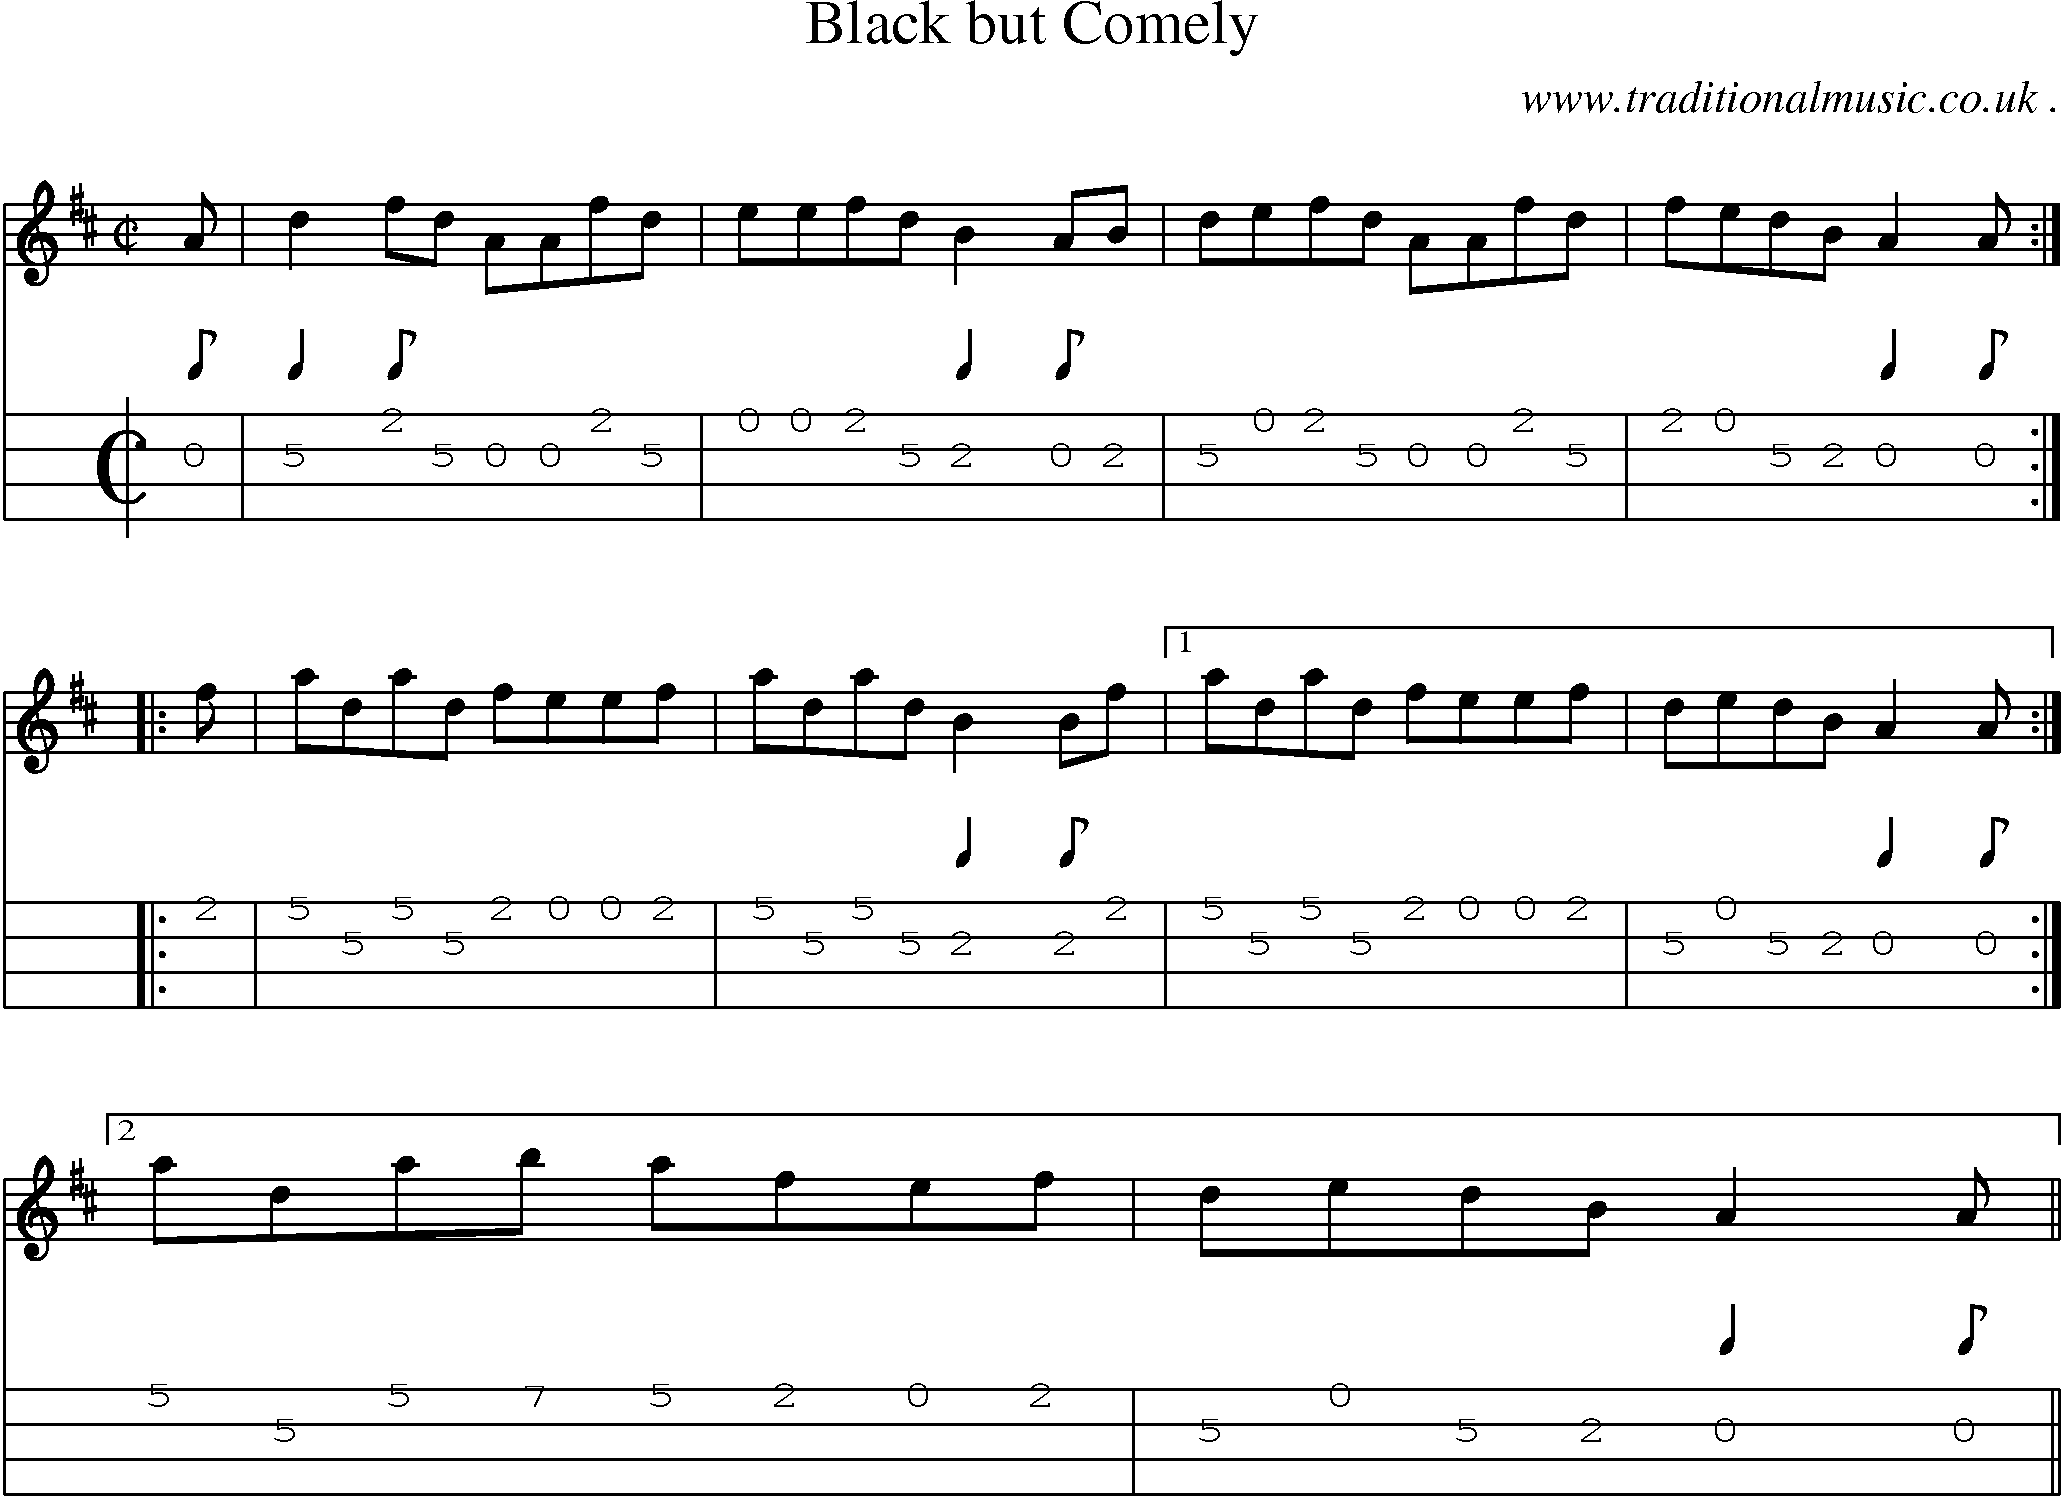 Sheet-music  score, Chords and Mandolin Tabs for Black But Comely